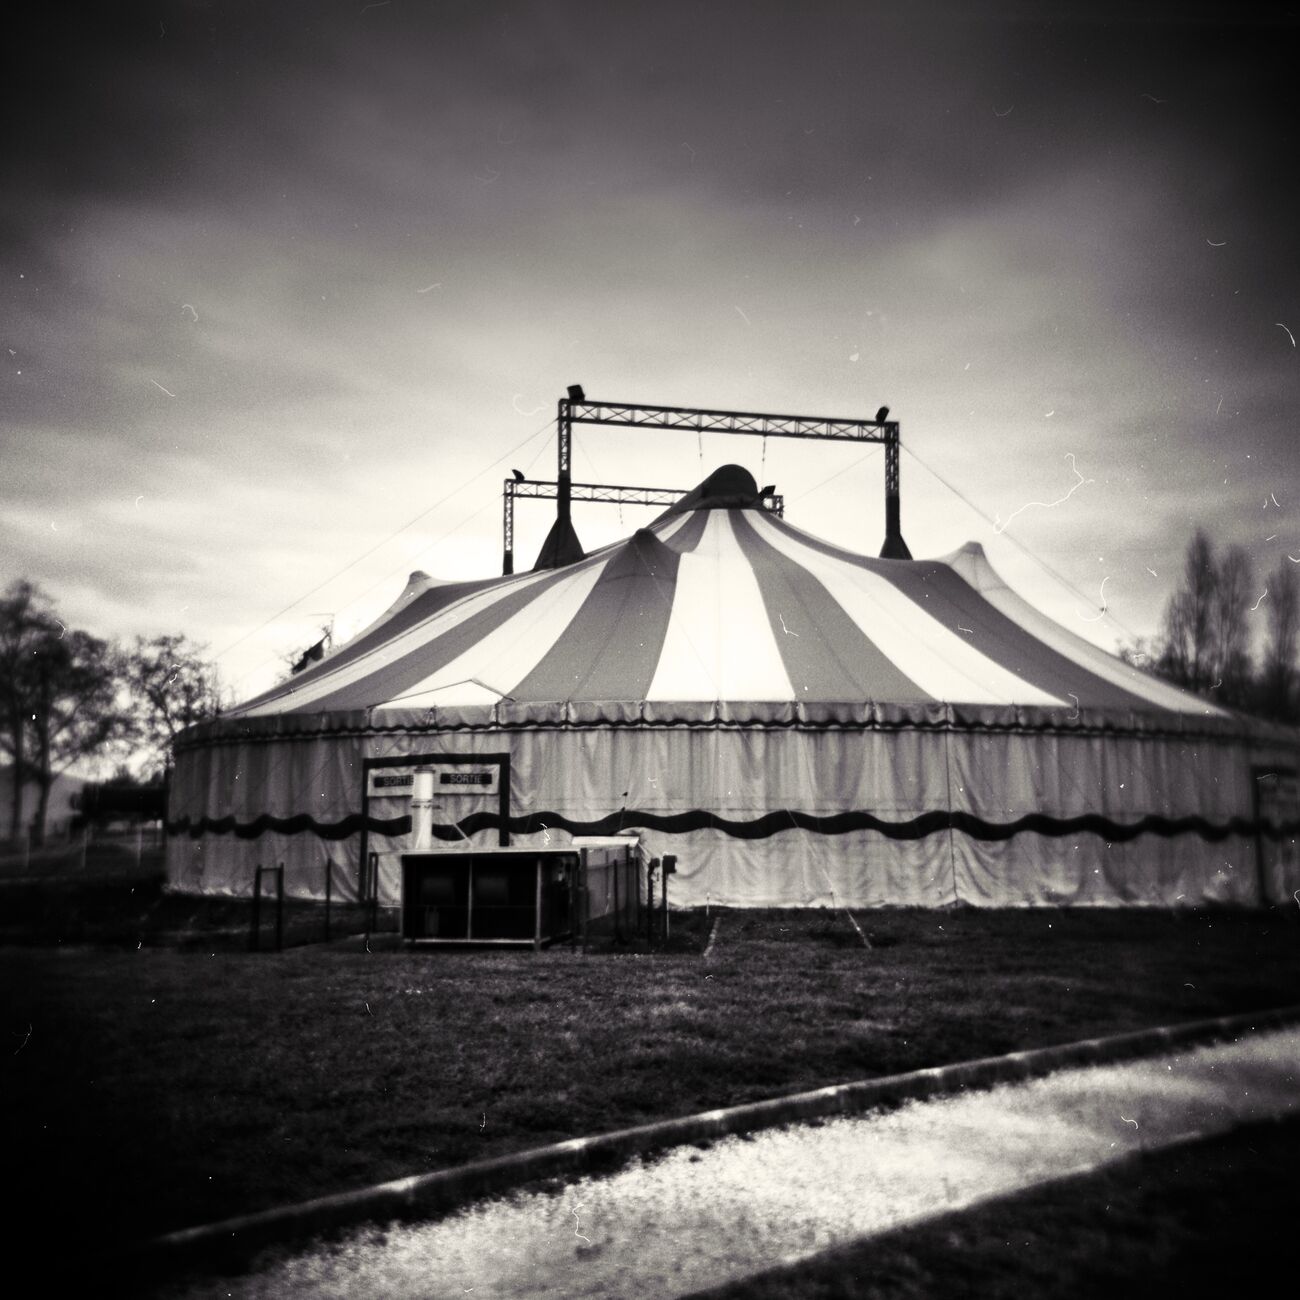 Circus, Bordeaux, France. March 2007. Ref-1073 - Denis Olivier Art Photography